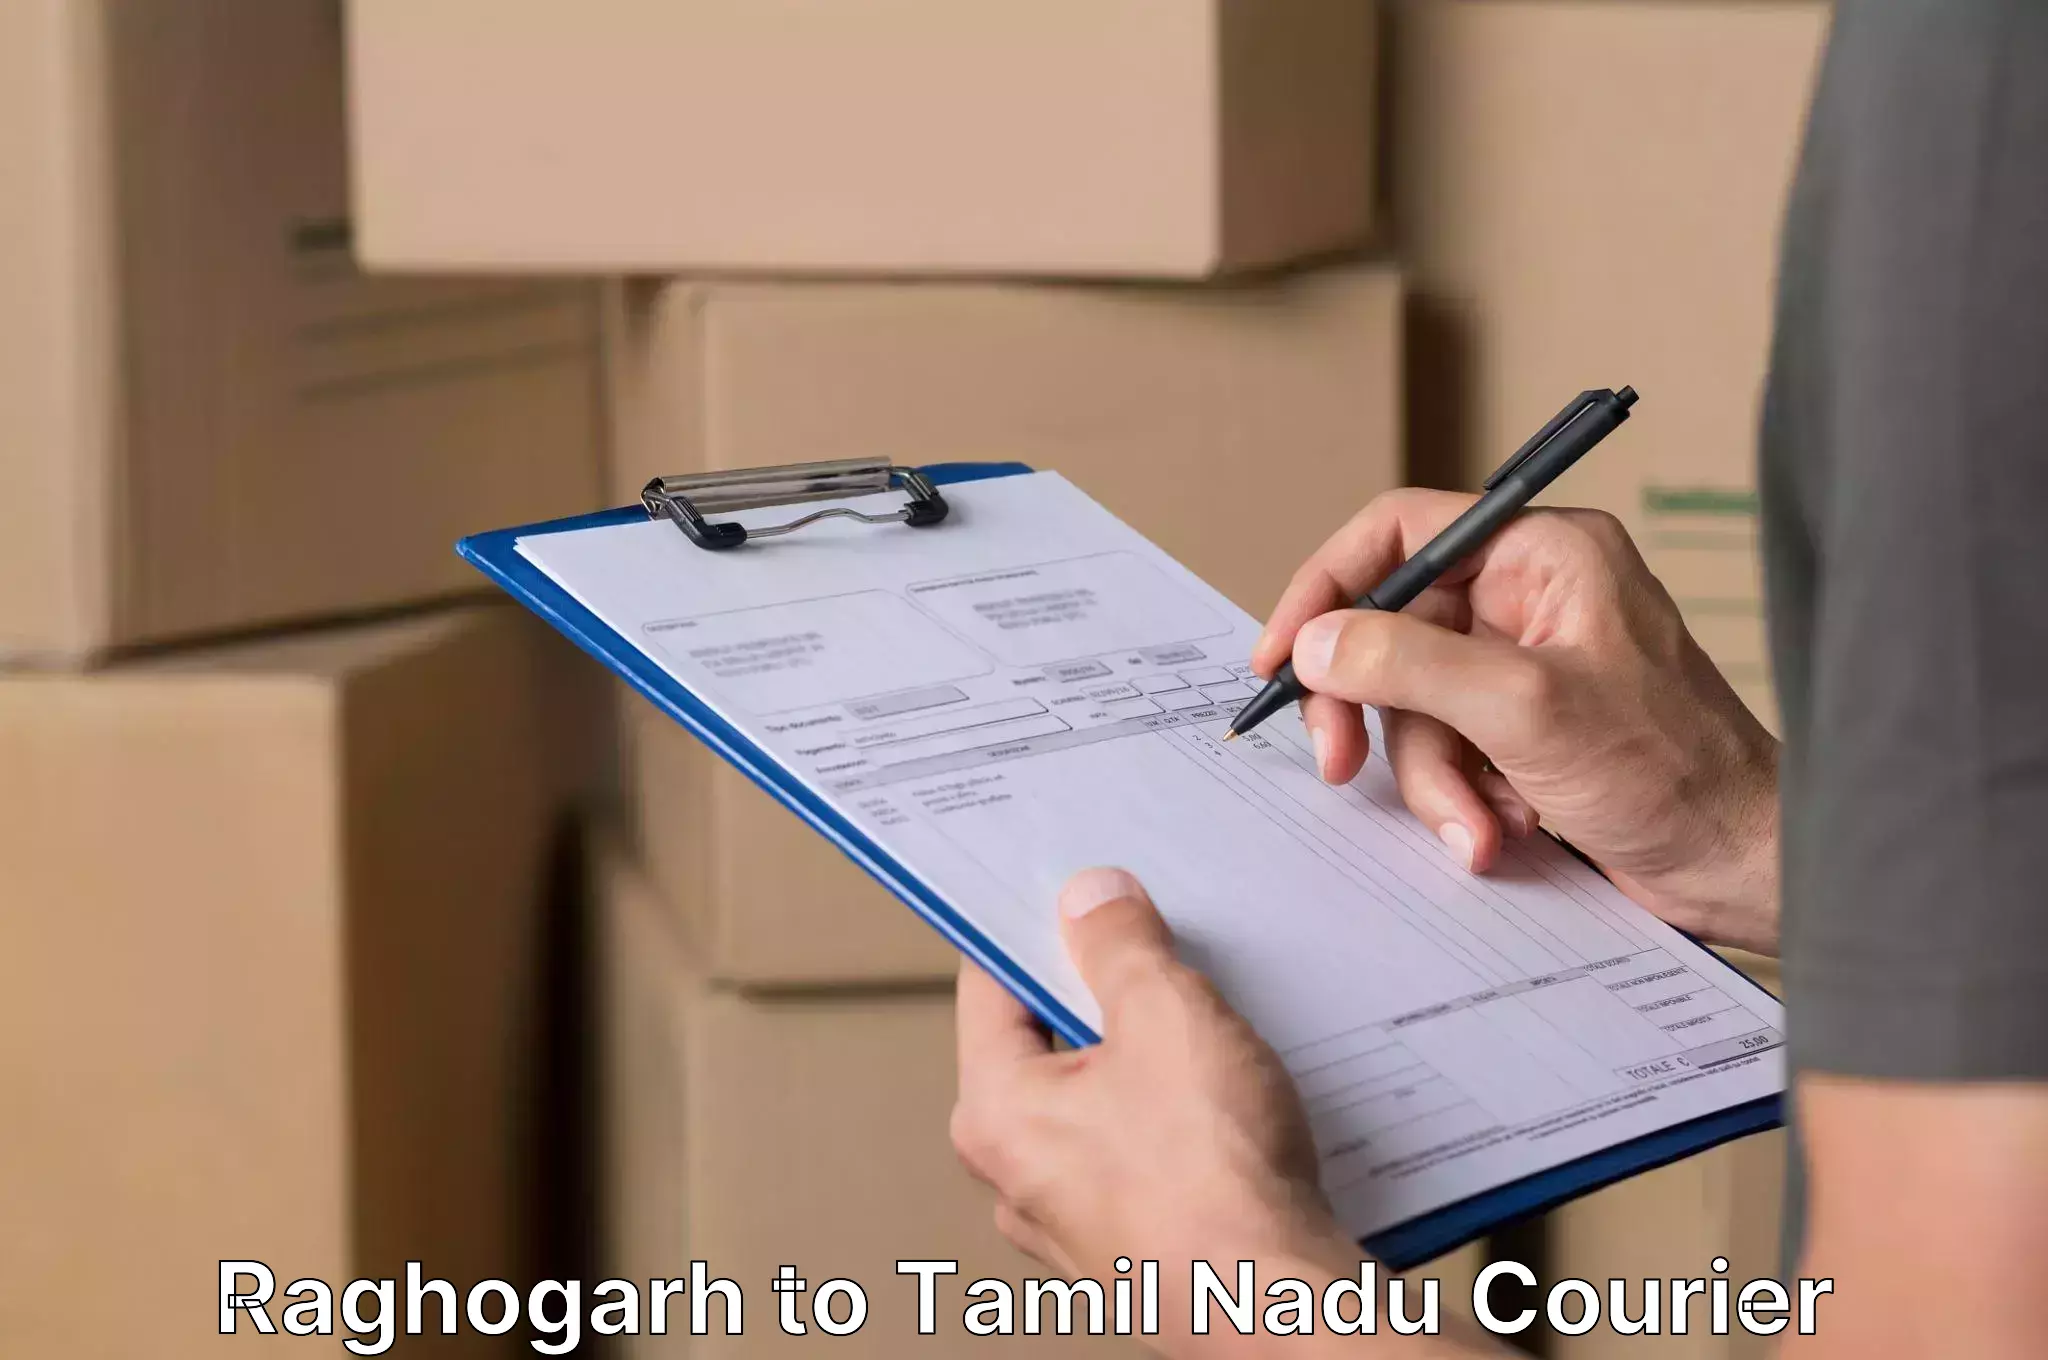 Home moving specialists Raghogarh to Melmaruvathur